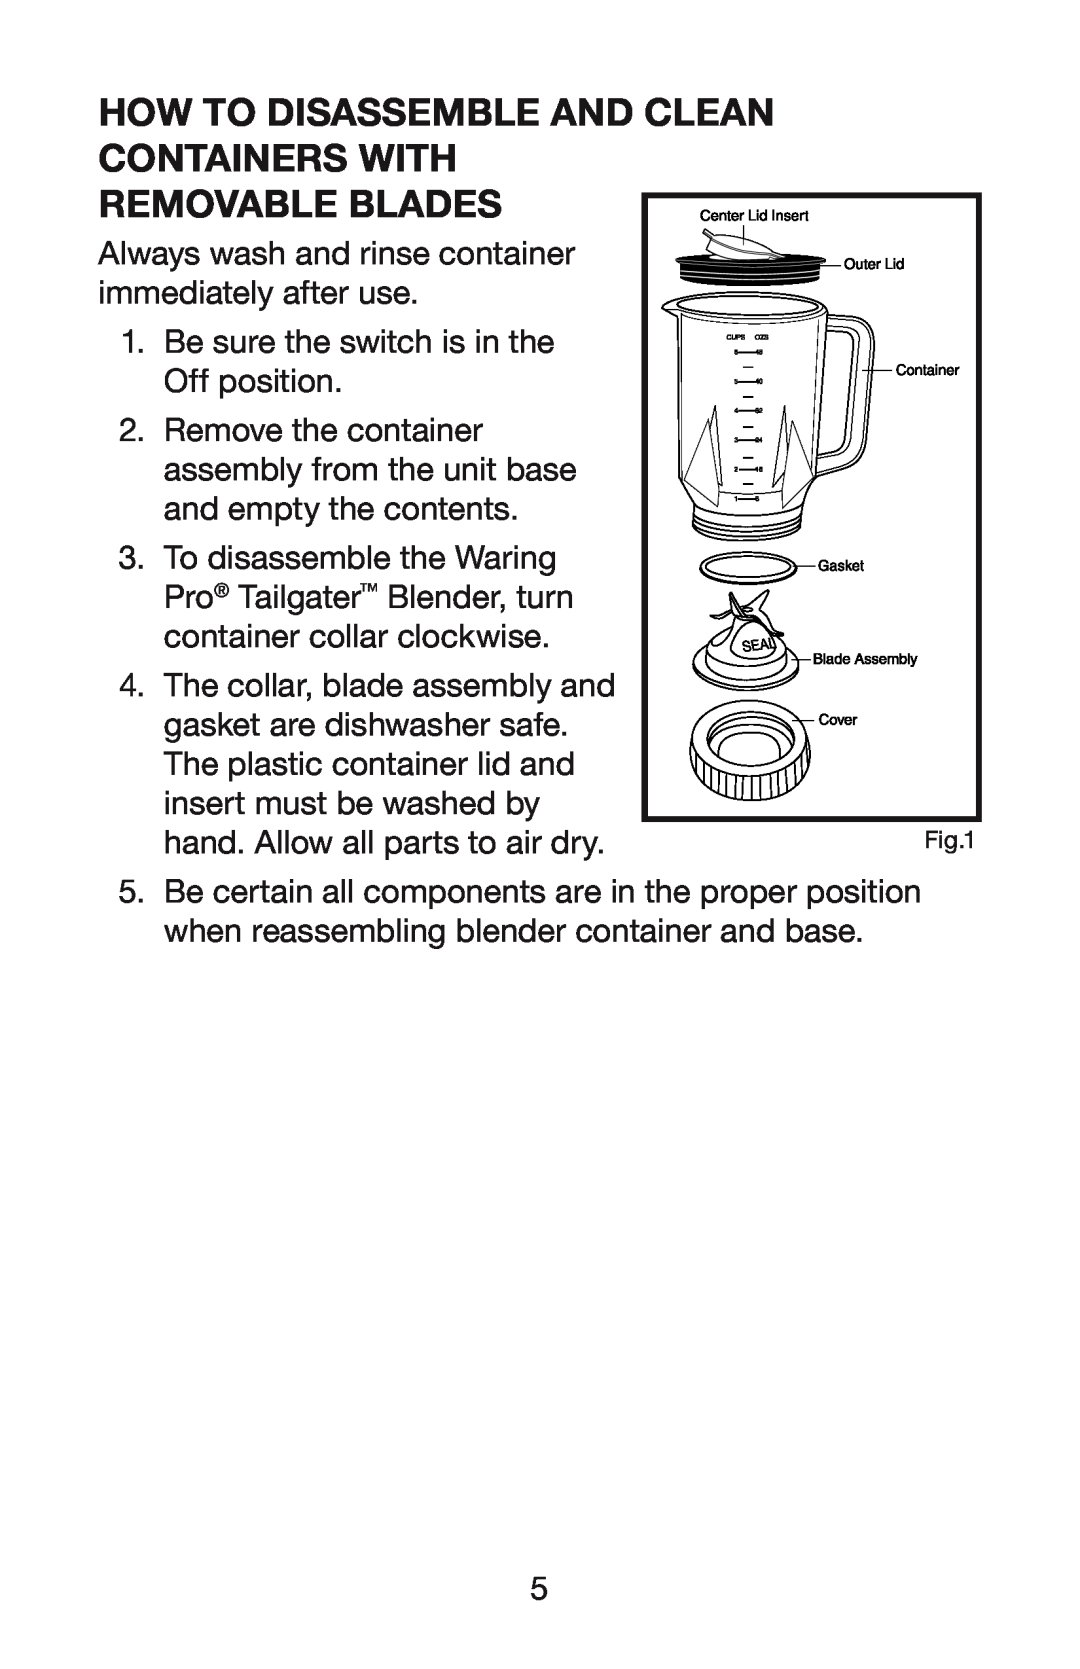 Waring TG15 manual Be sure the switch is in the Off position 